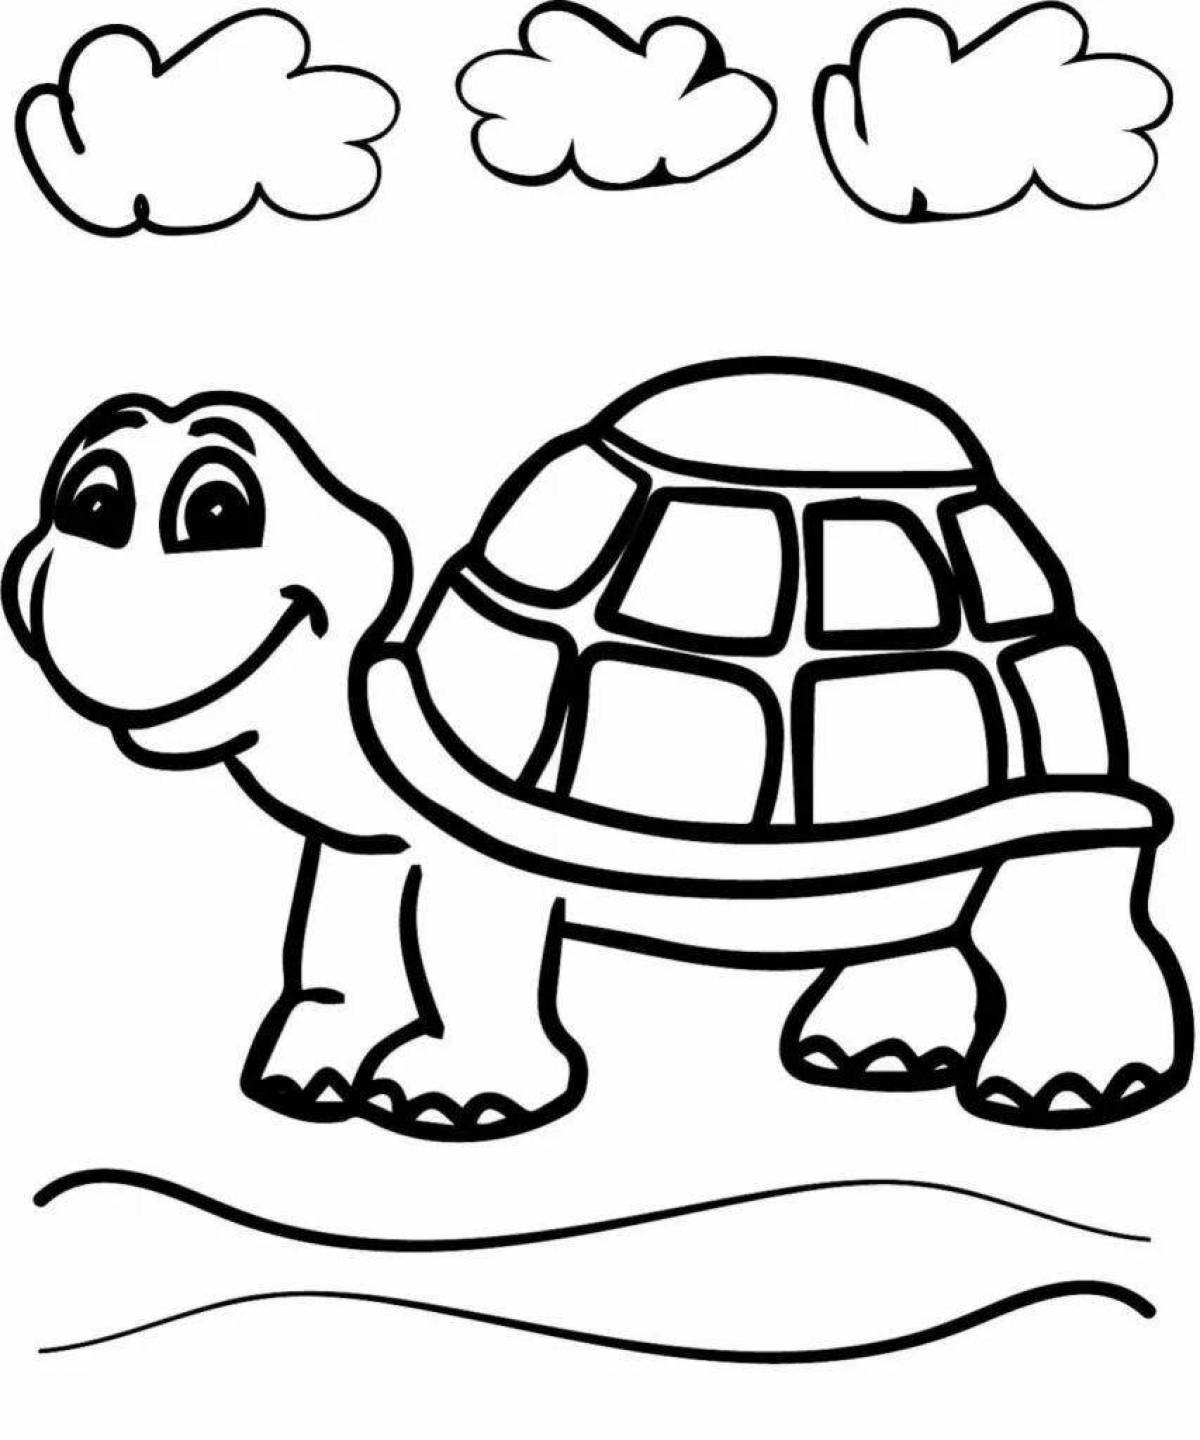 Colorful turtle coloring page